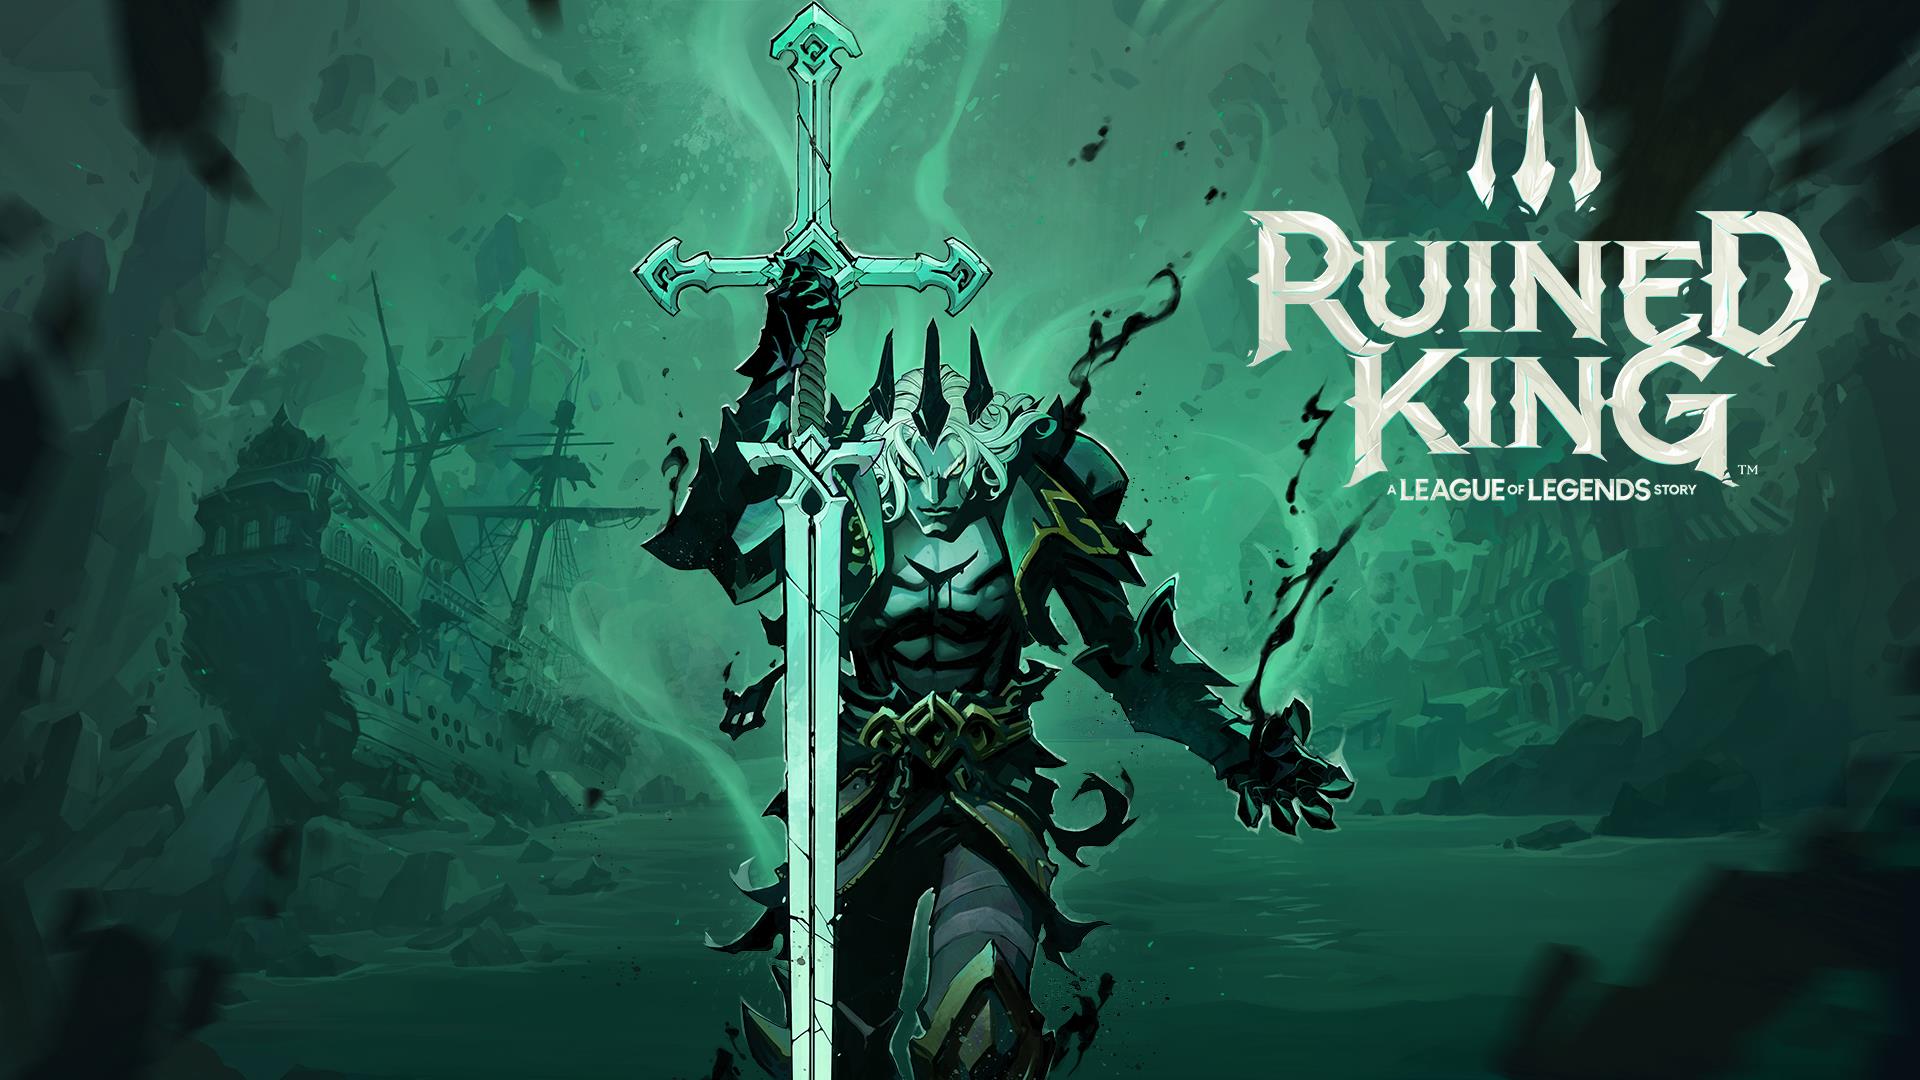 Image for League of Legends turn-based RPG Ruined King is coming to PC and consoles early next year